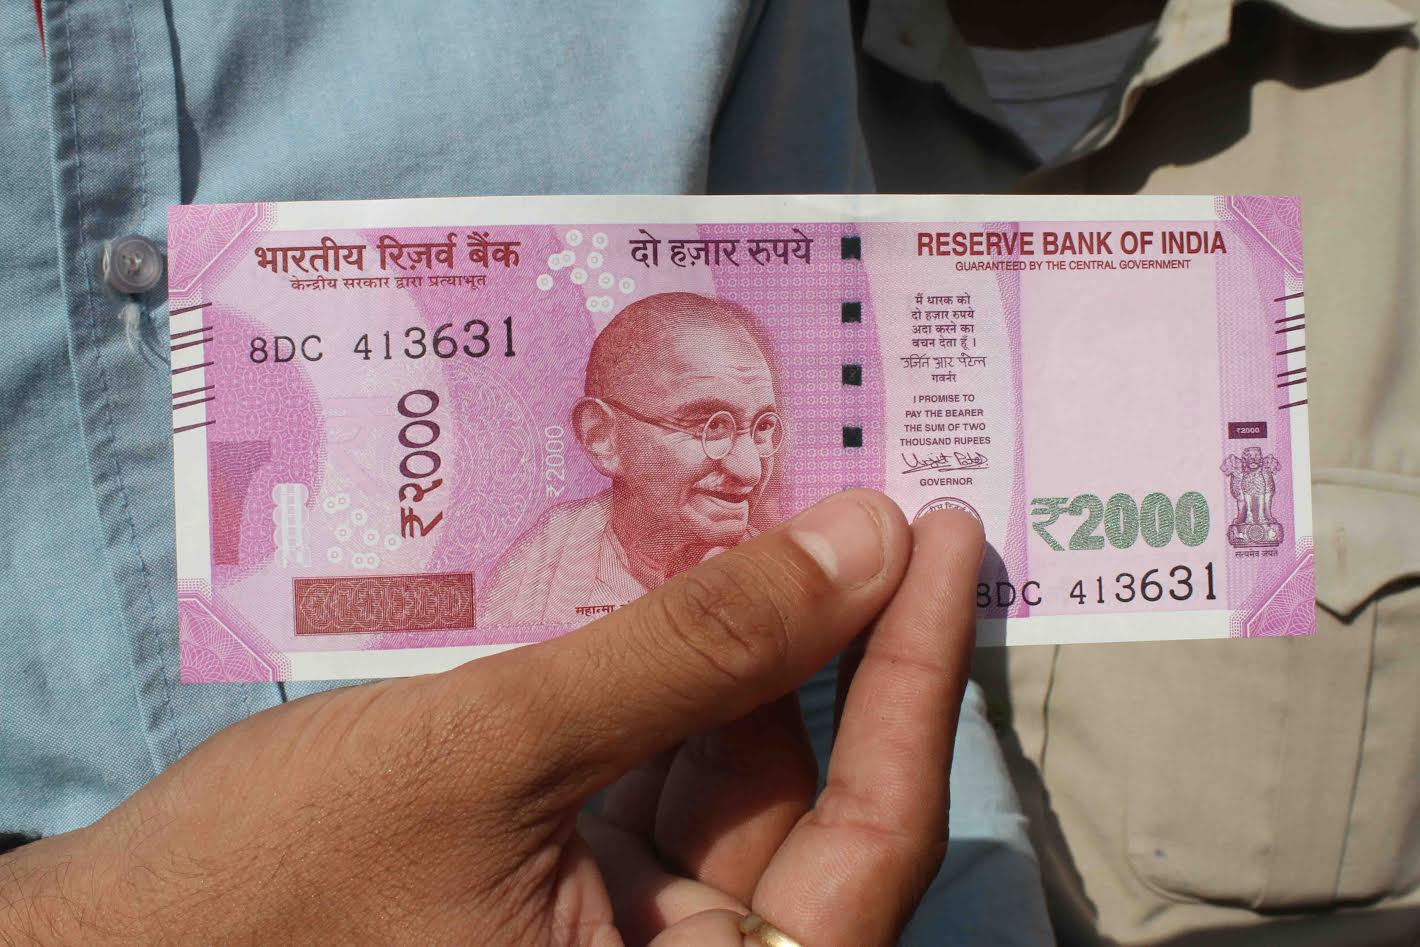 Provide over-the-counter exchange facility for Rs. 2000 banknotes to public: RBI to Banks